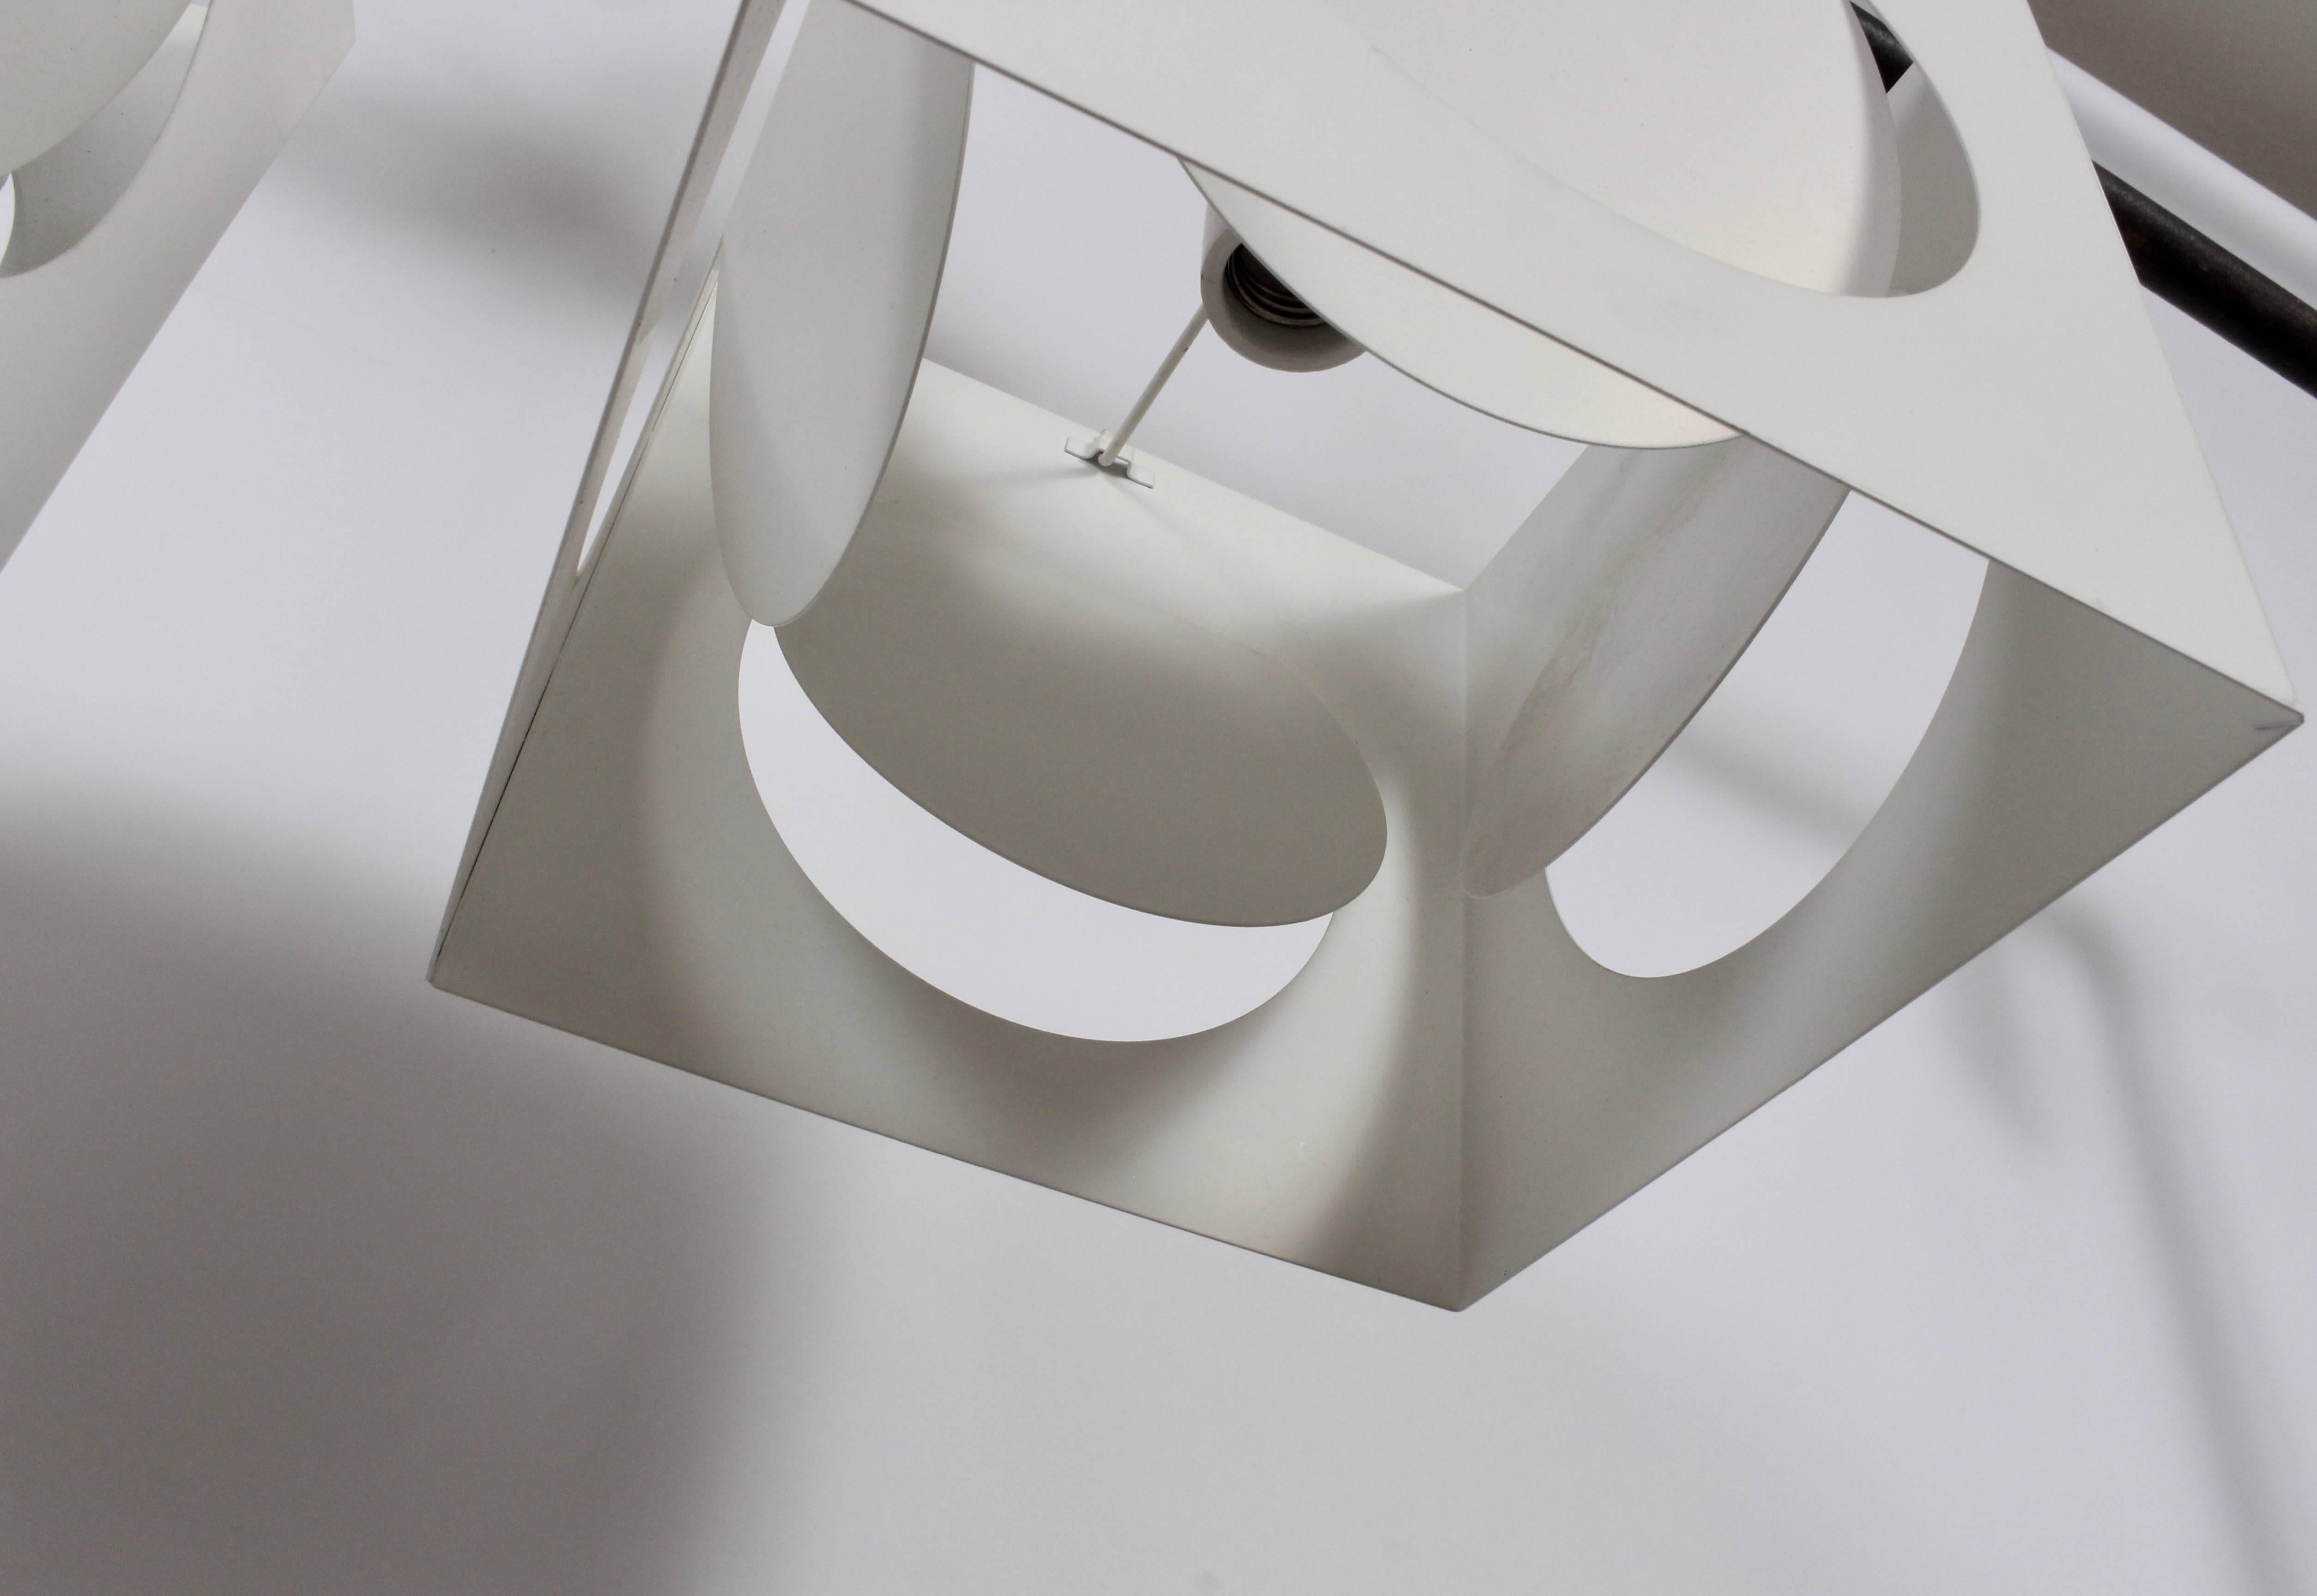 Danish Pair of Shogo Suzuki for Stockmann Orno White Metal Cube Hanging Lamps, 1960s For Sale